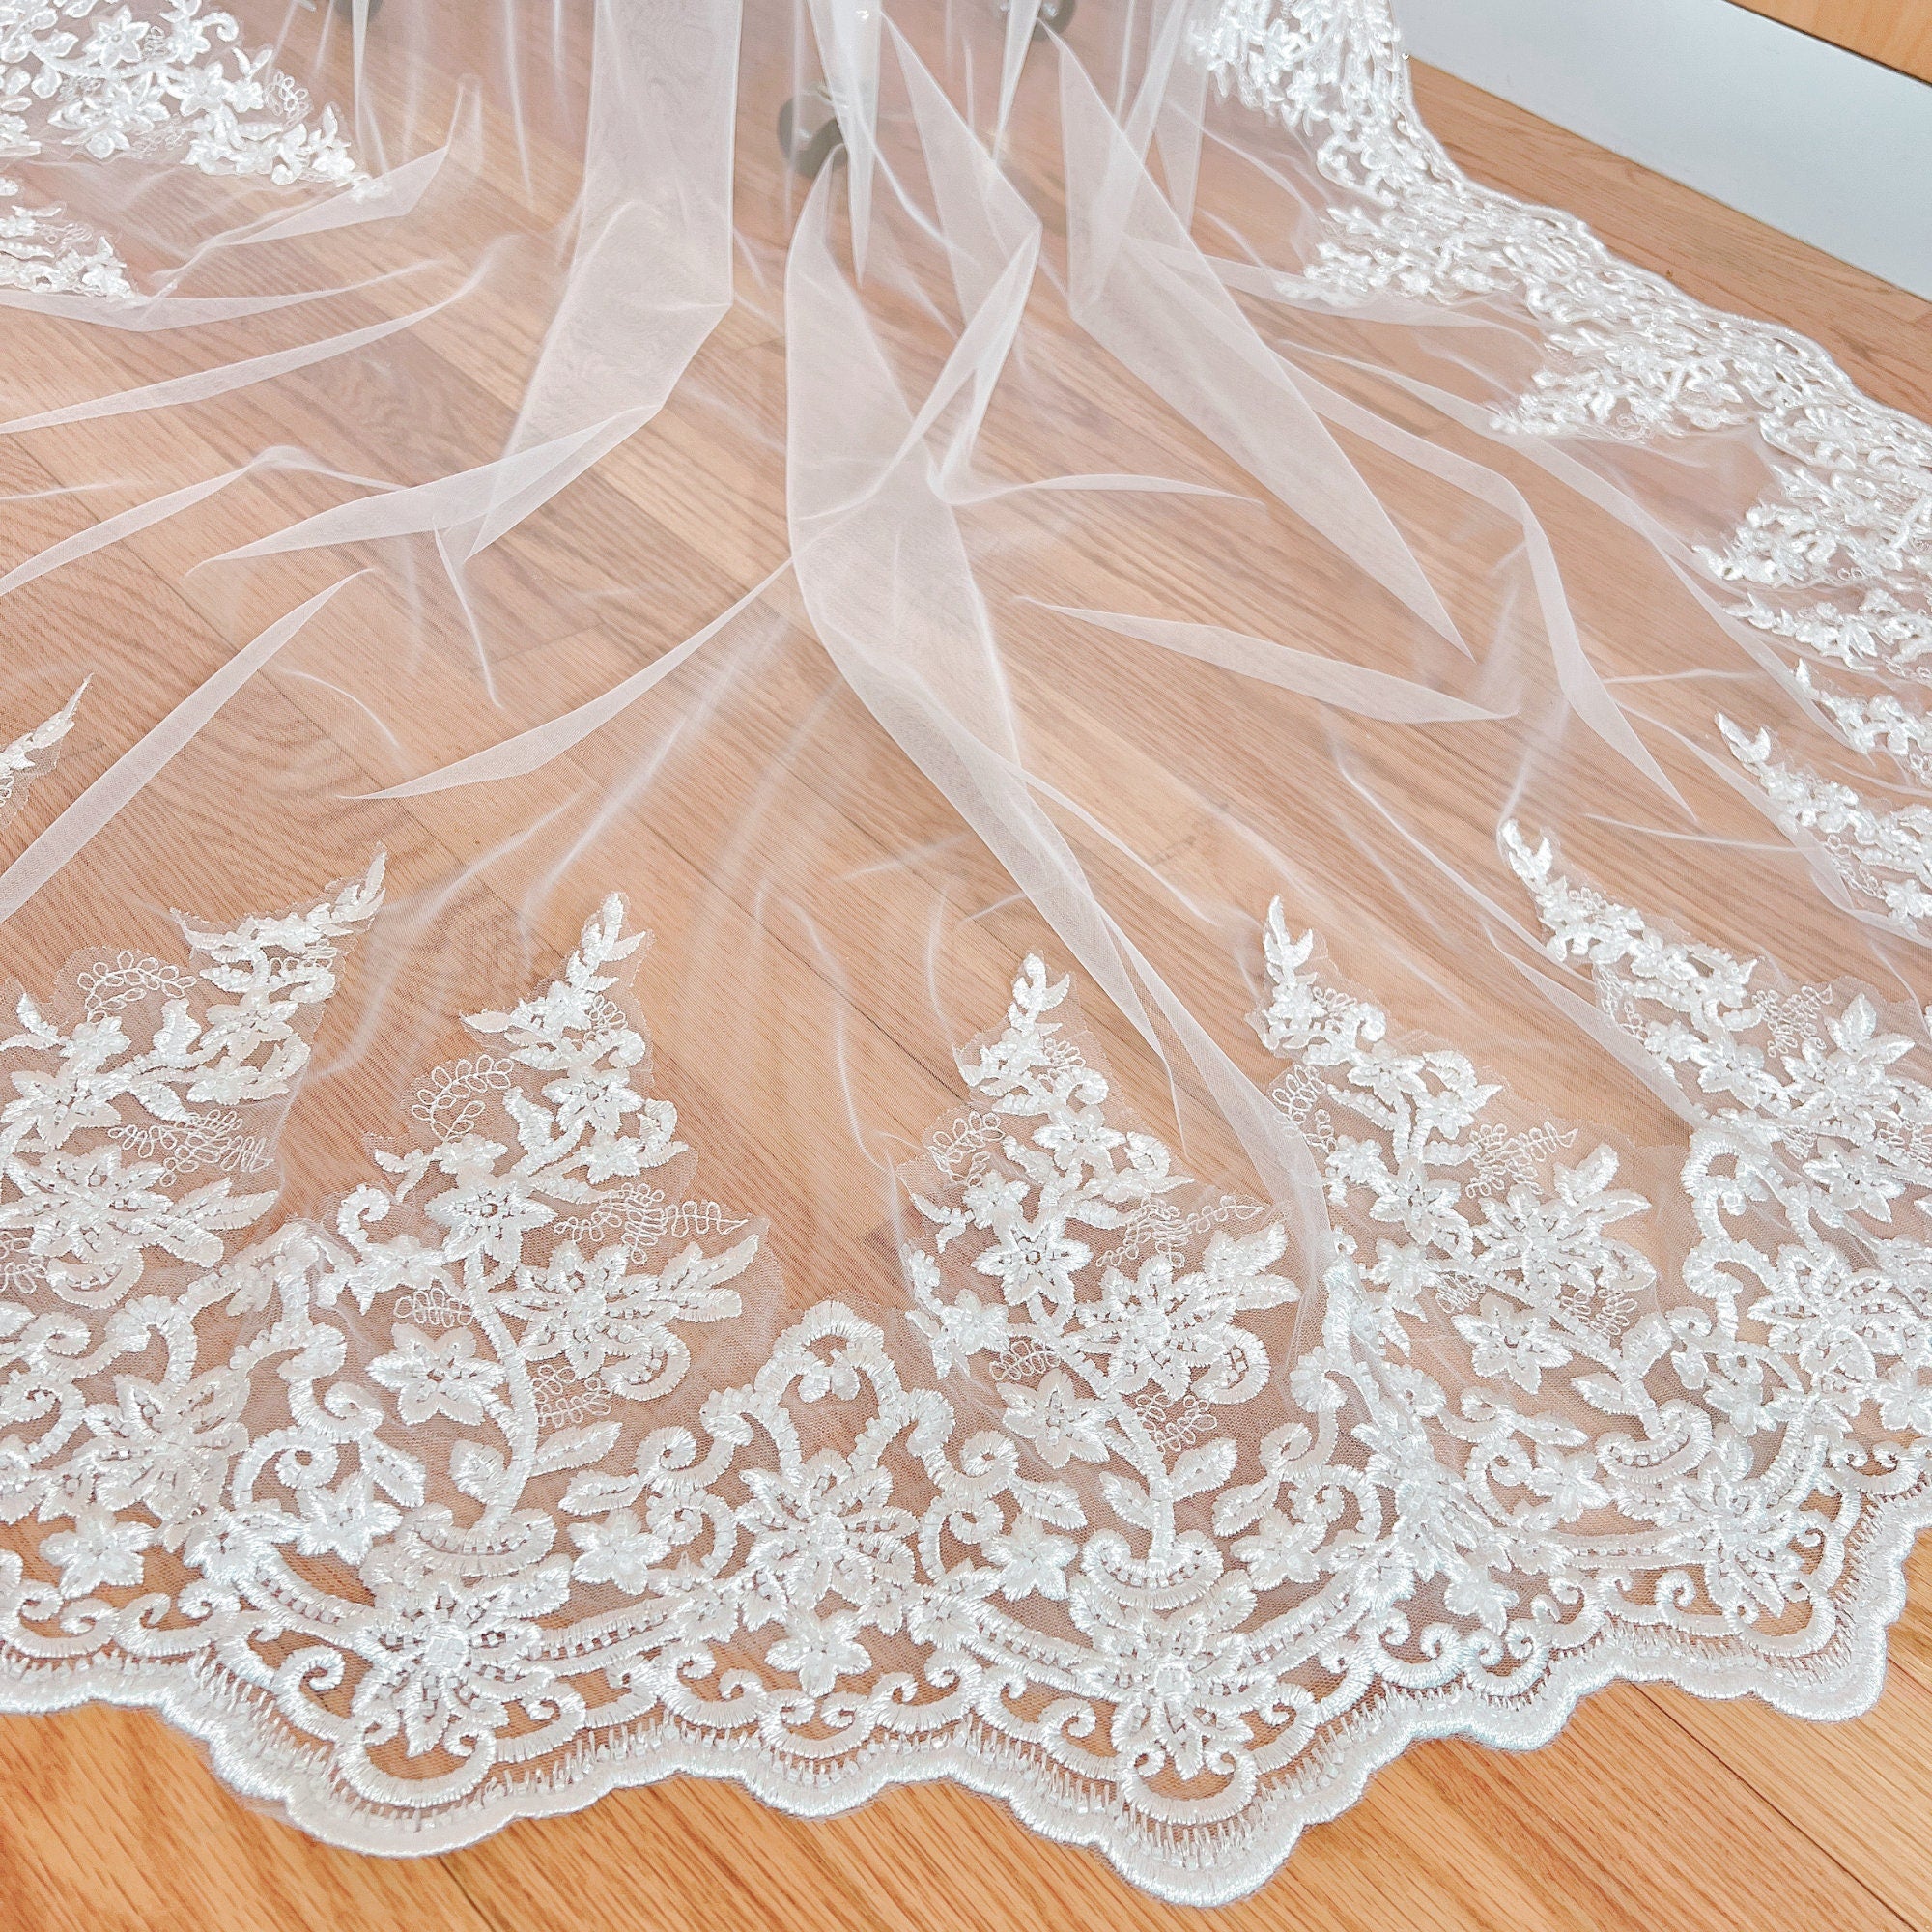 Chapel Veil with Lace